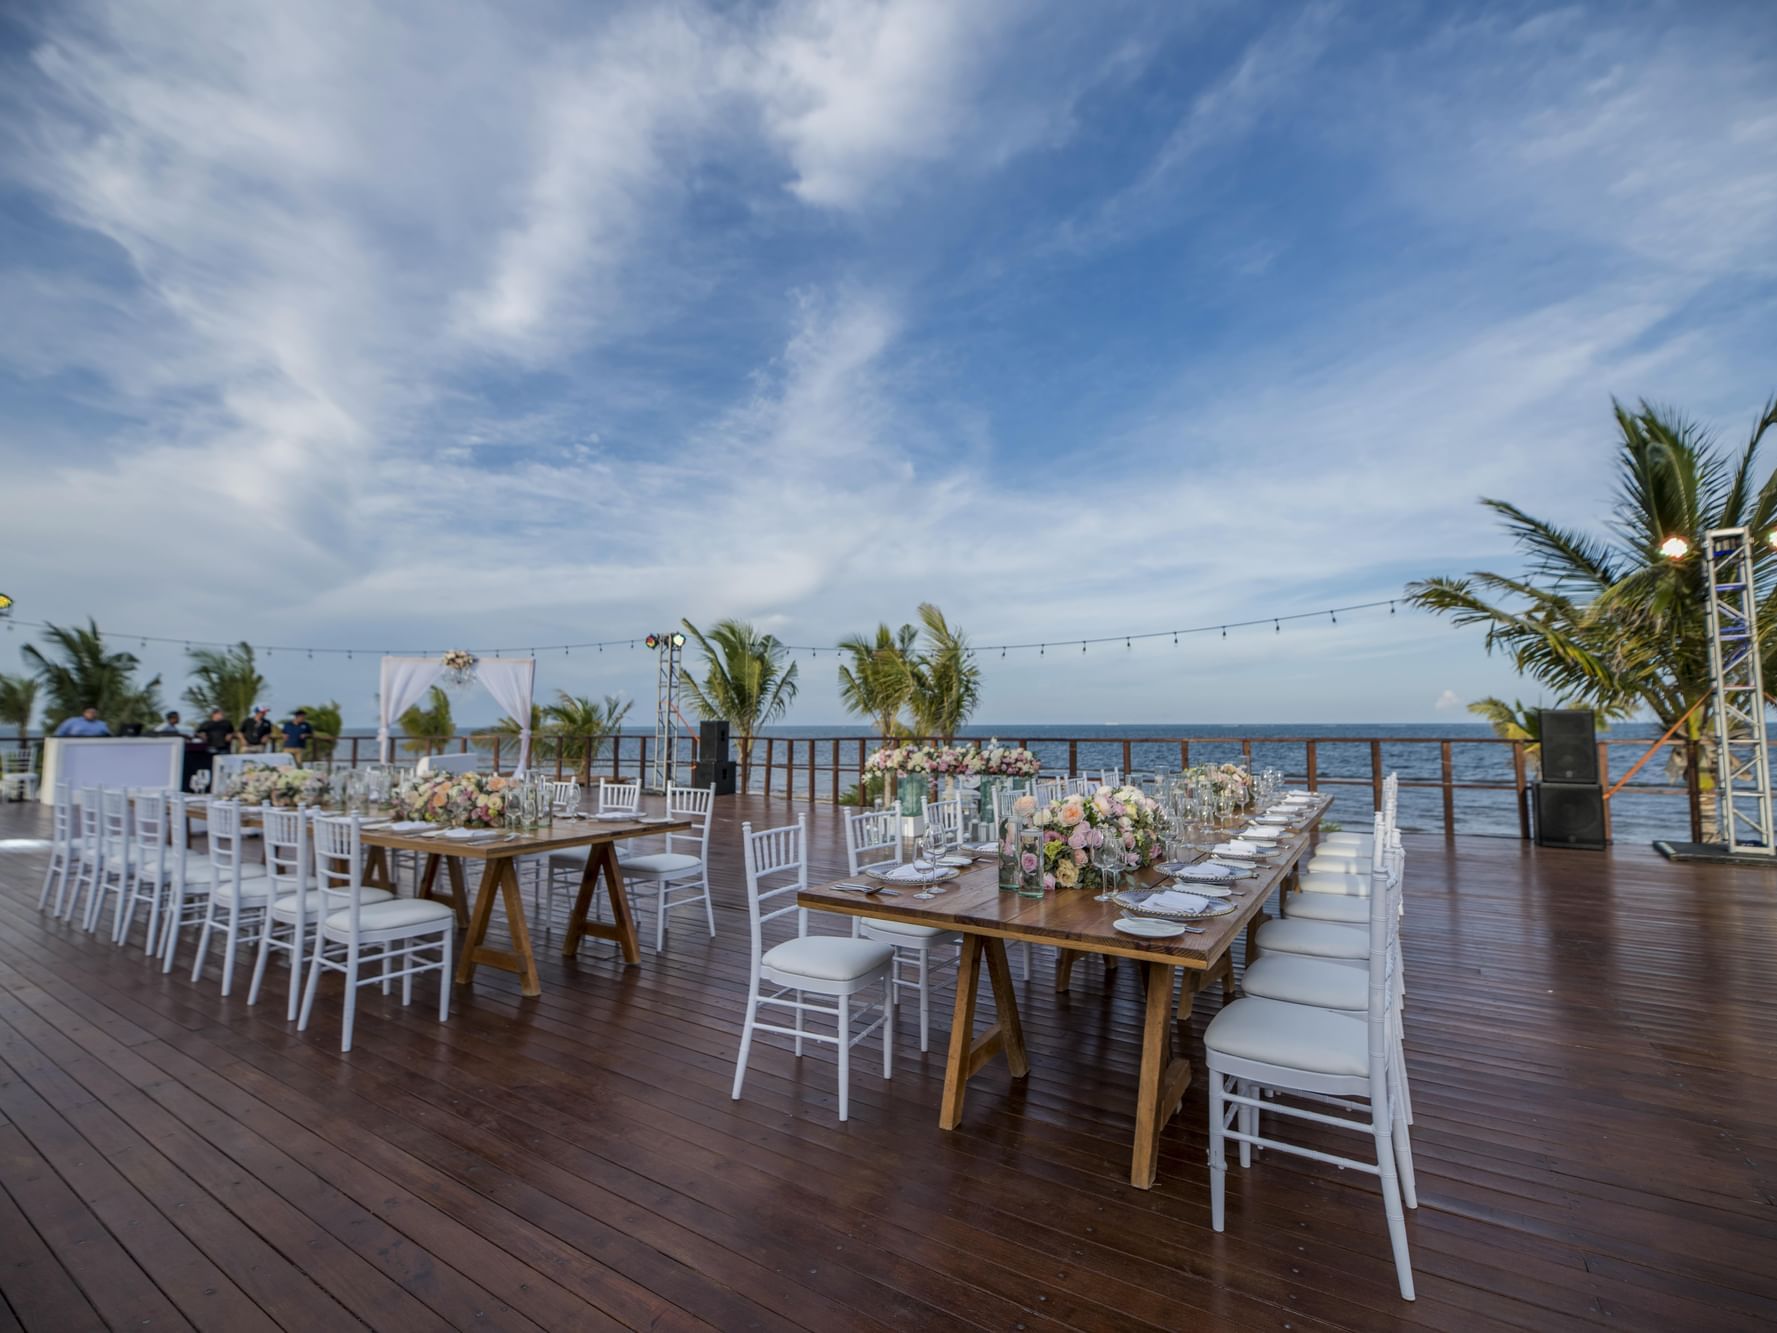 Banquet-style dining set-up with fresh flowers, candles & cutlery on vora deck at Haven Riviera Cancun